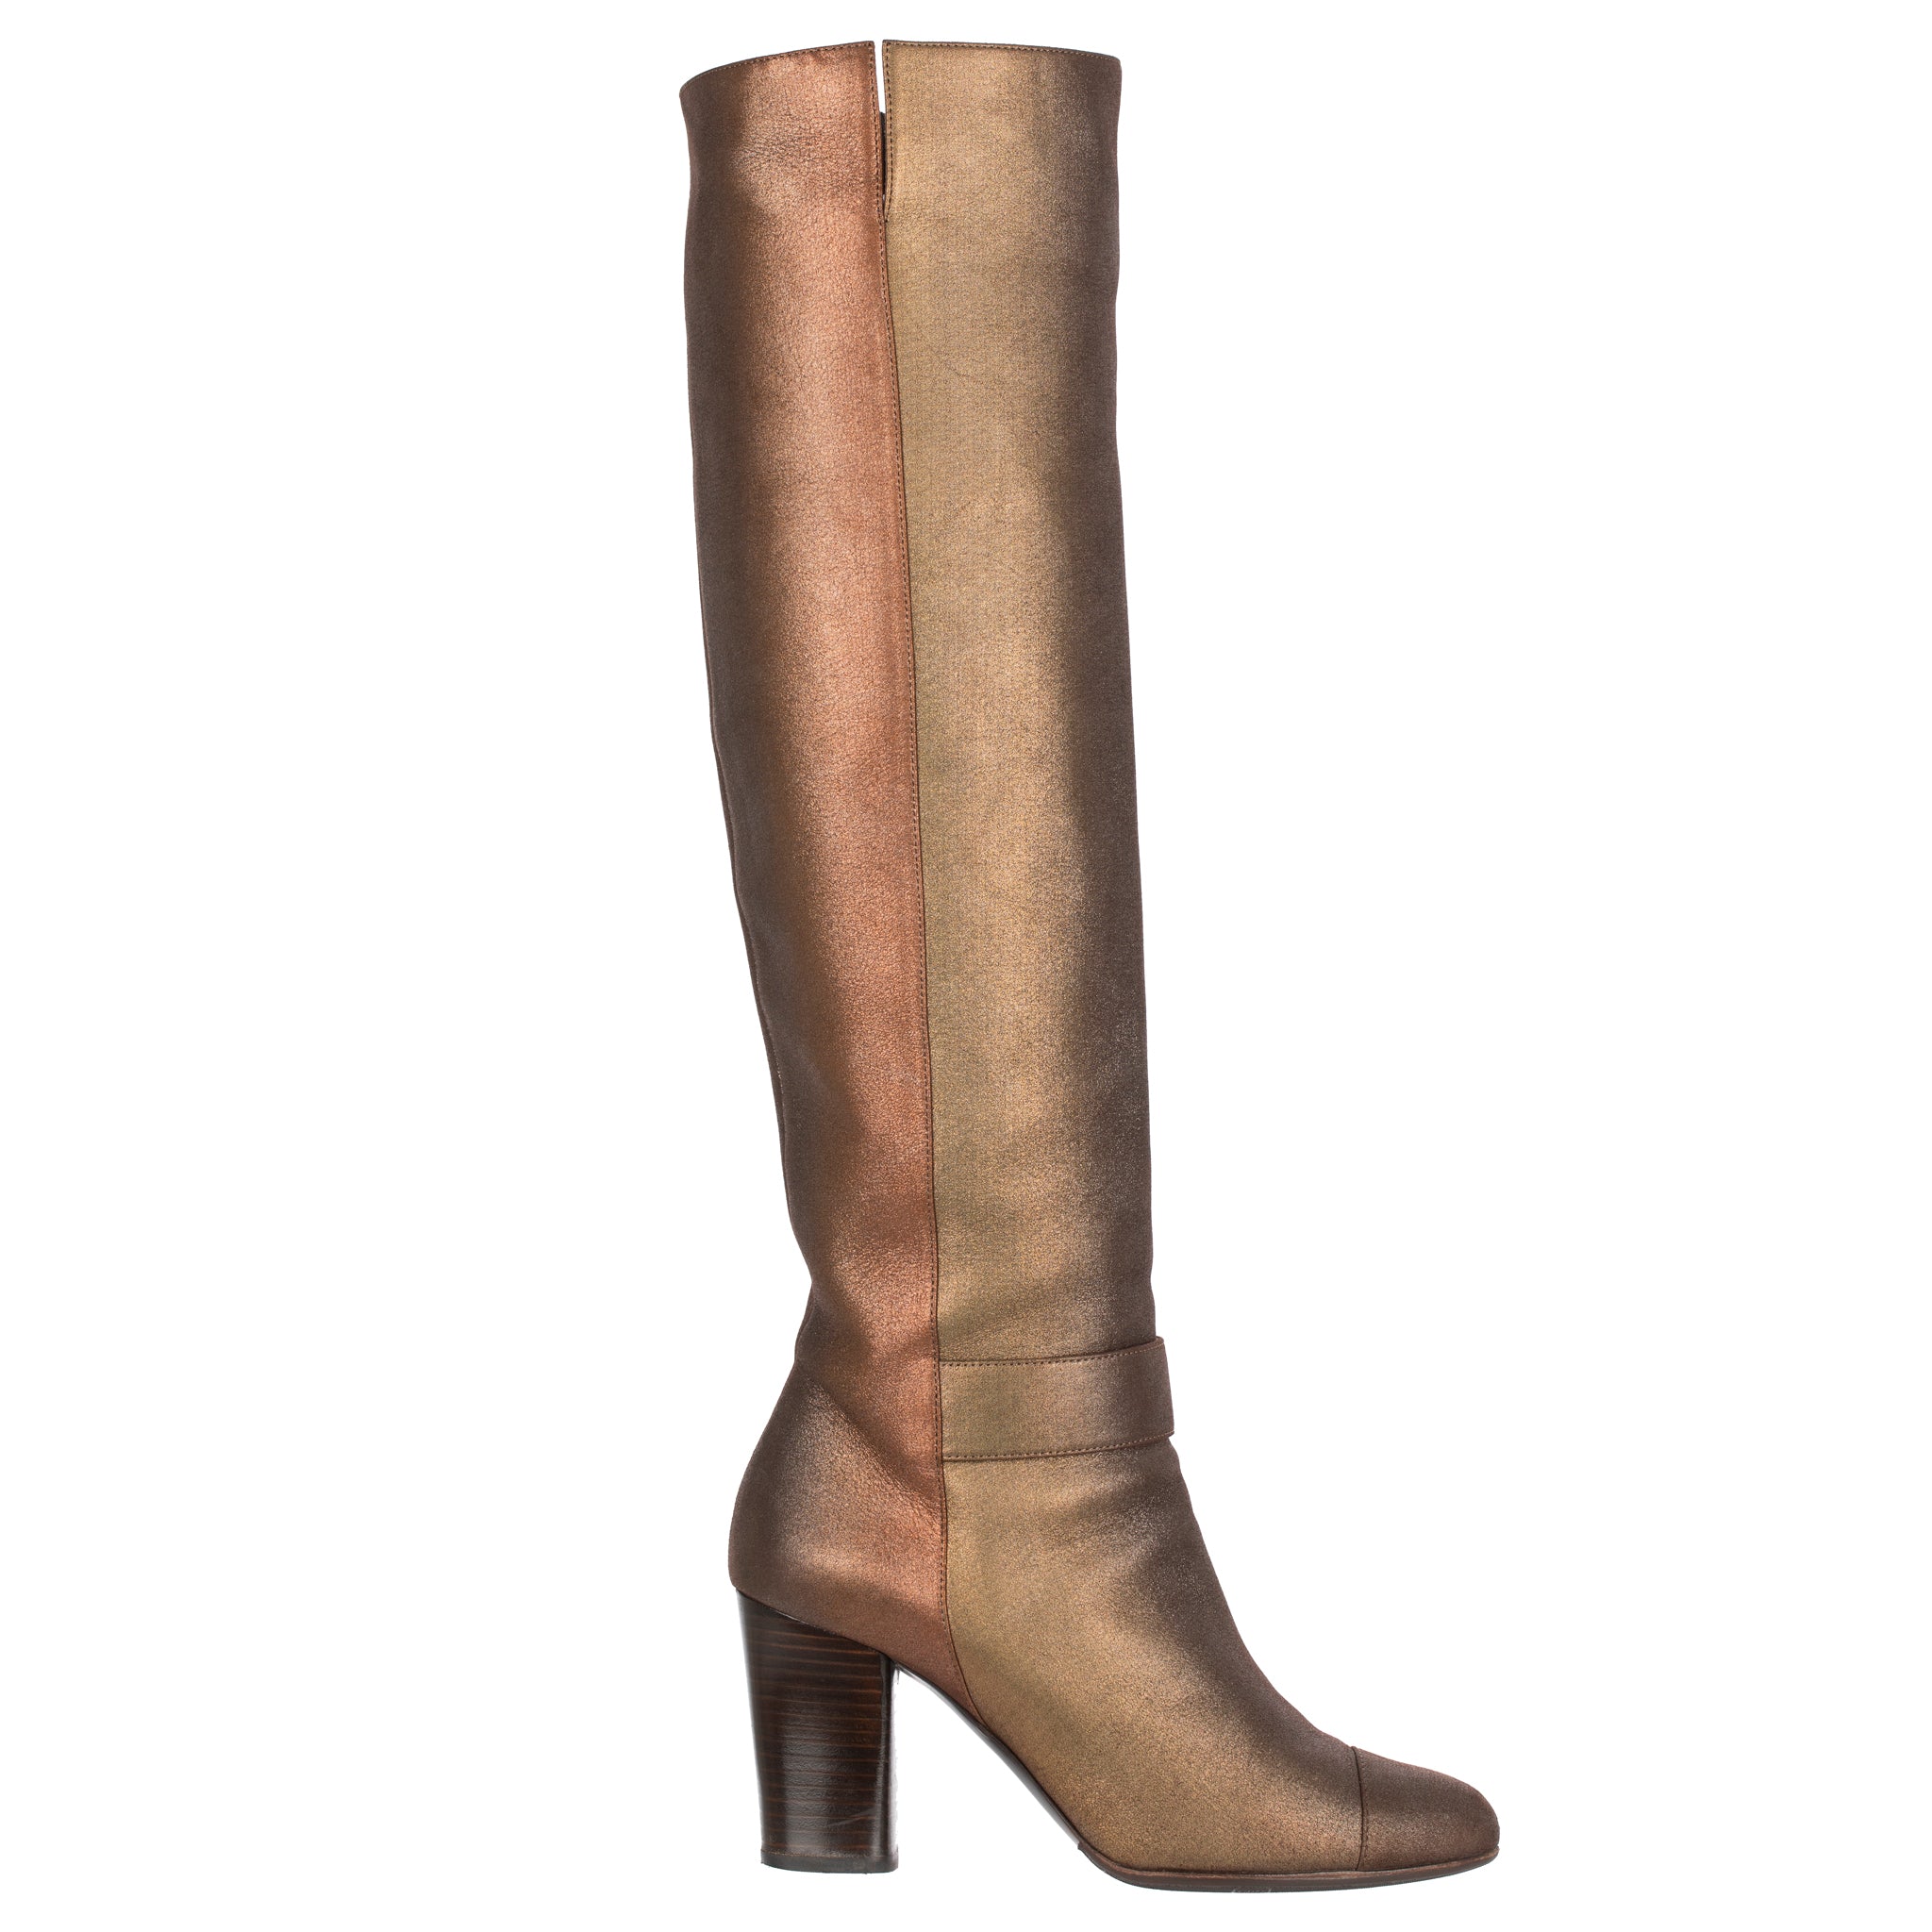 Chanel Metallic Rose Gold & Copper Knee Length High Boots 38 Fr